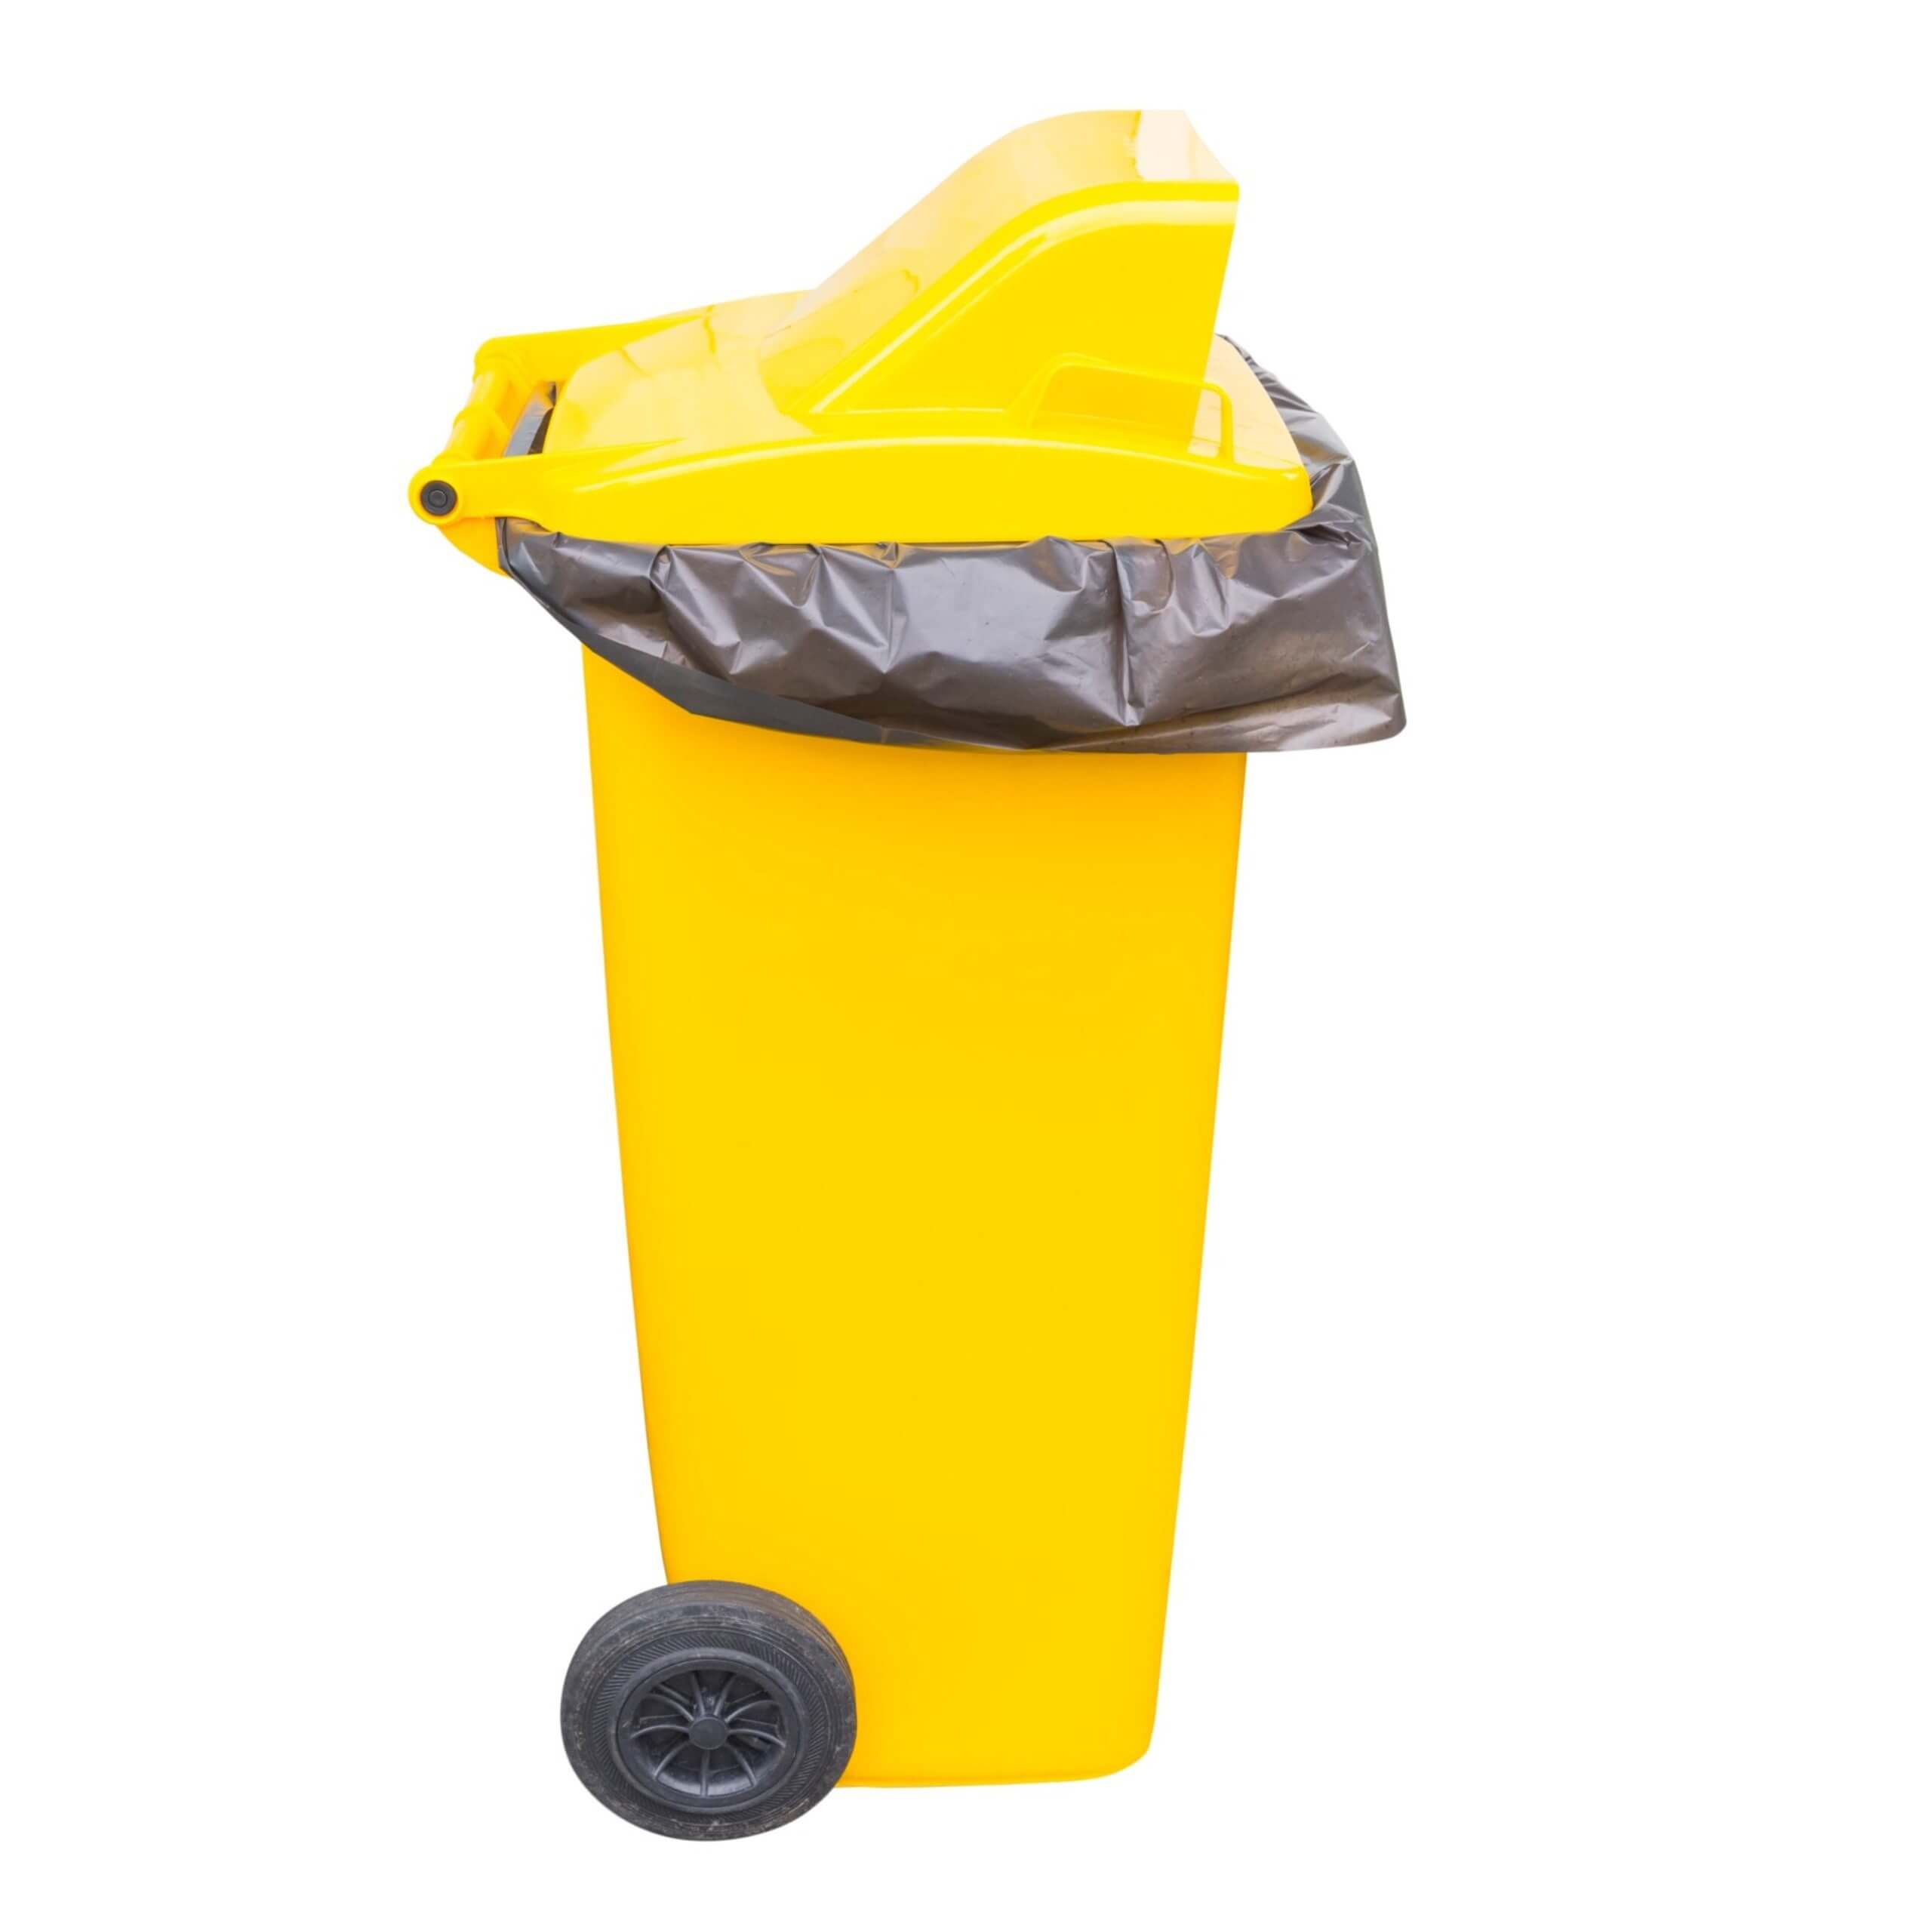 An image of our Wheelie Bin Refuse Bags in use.